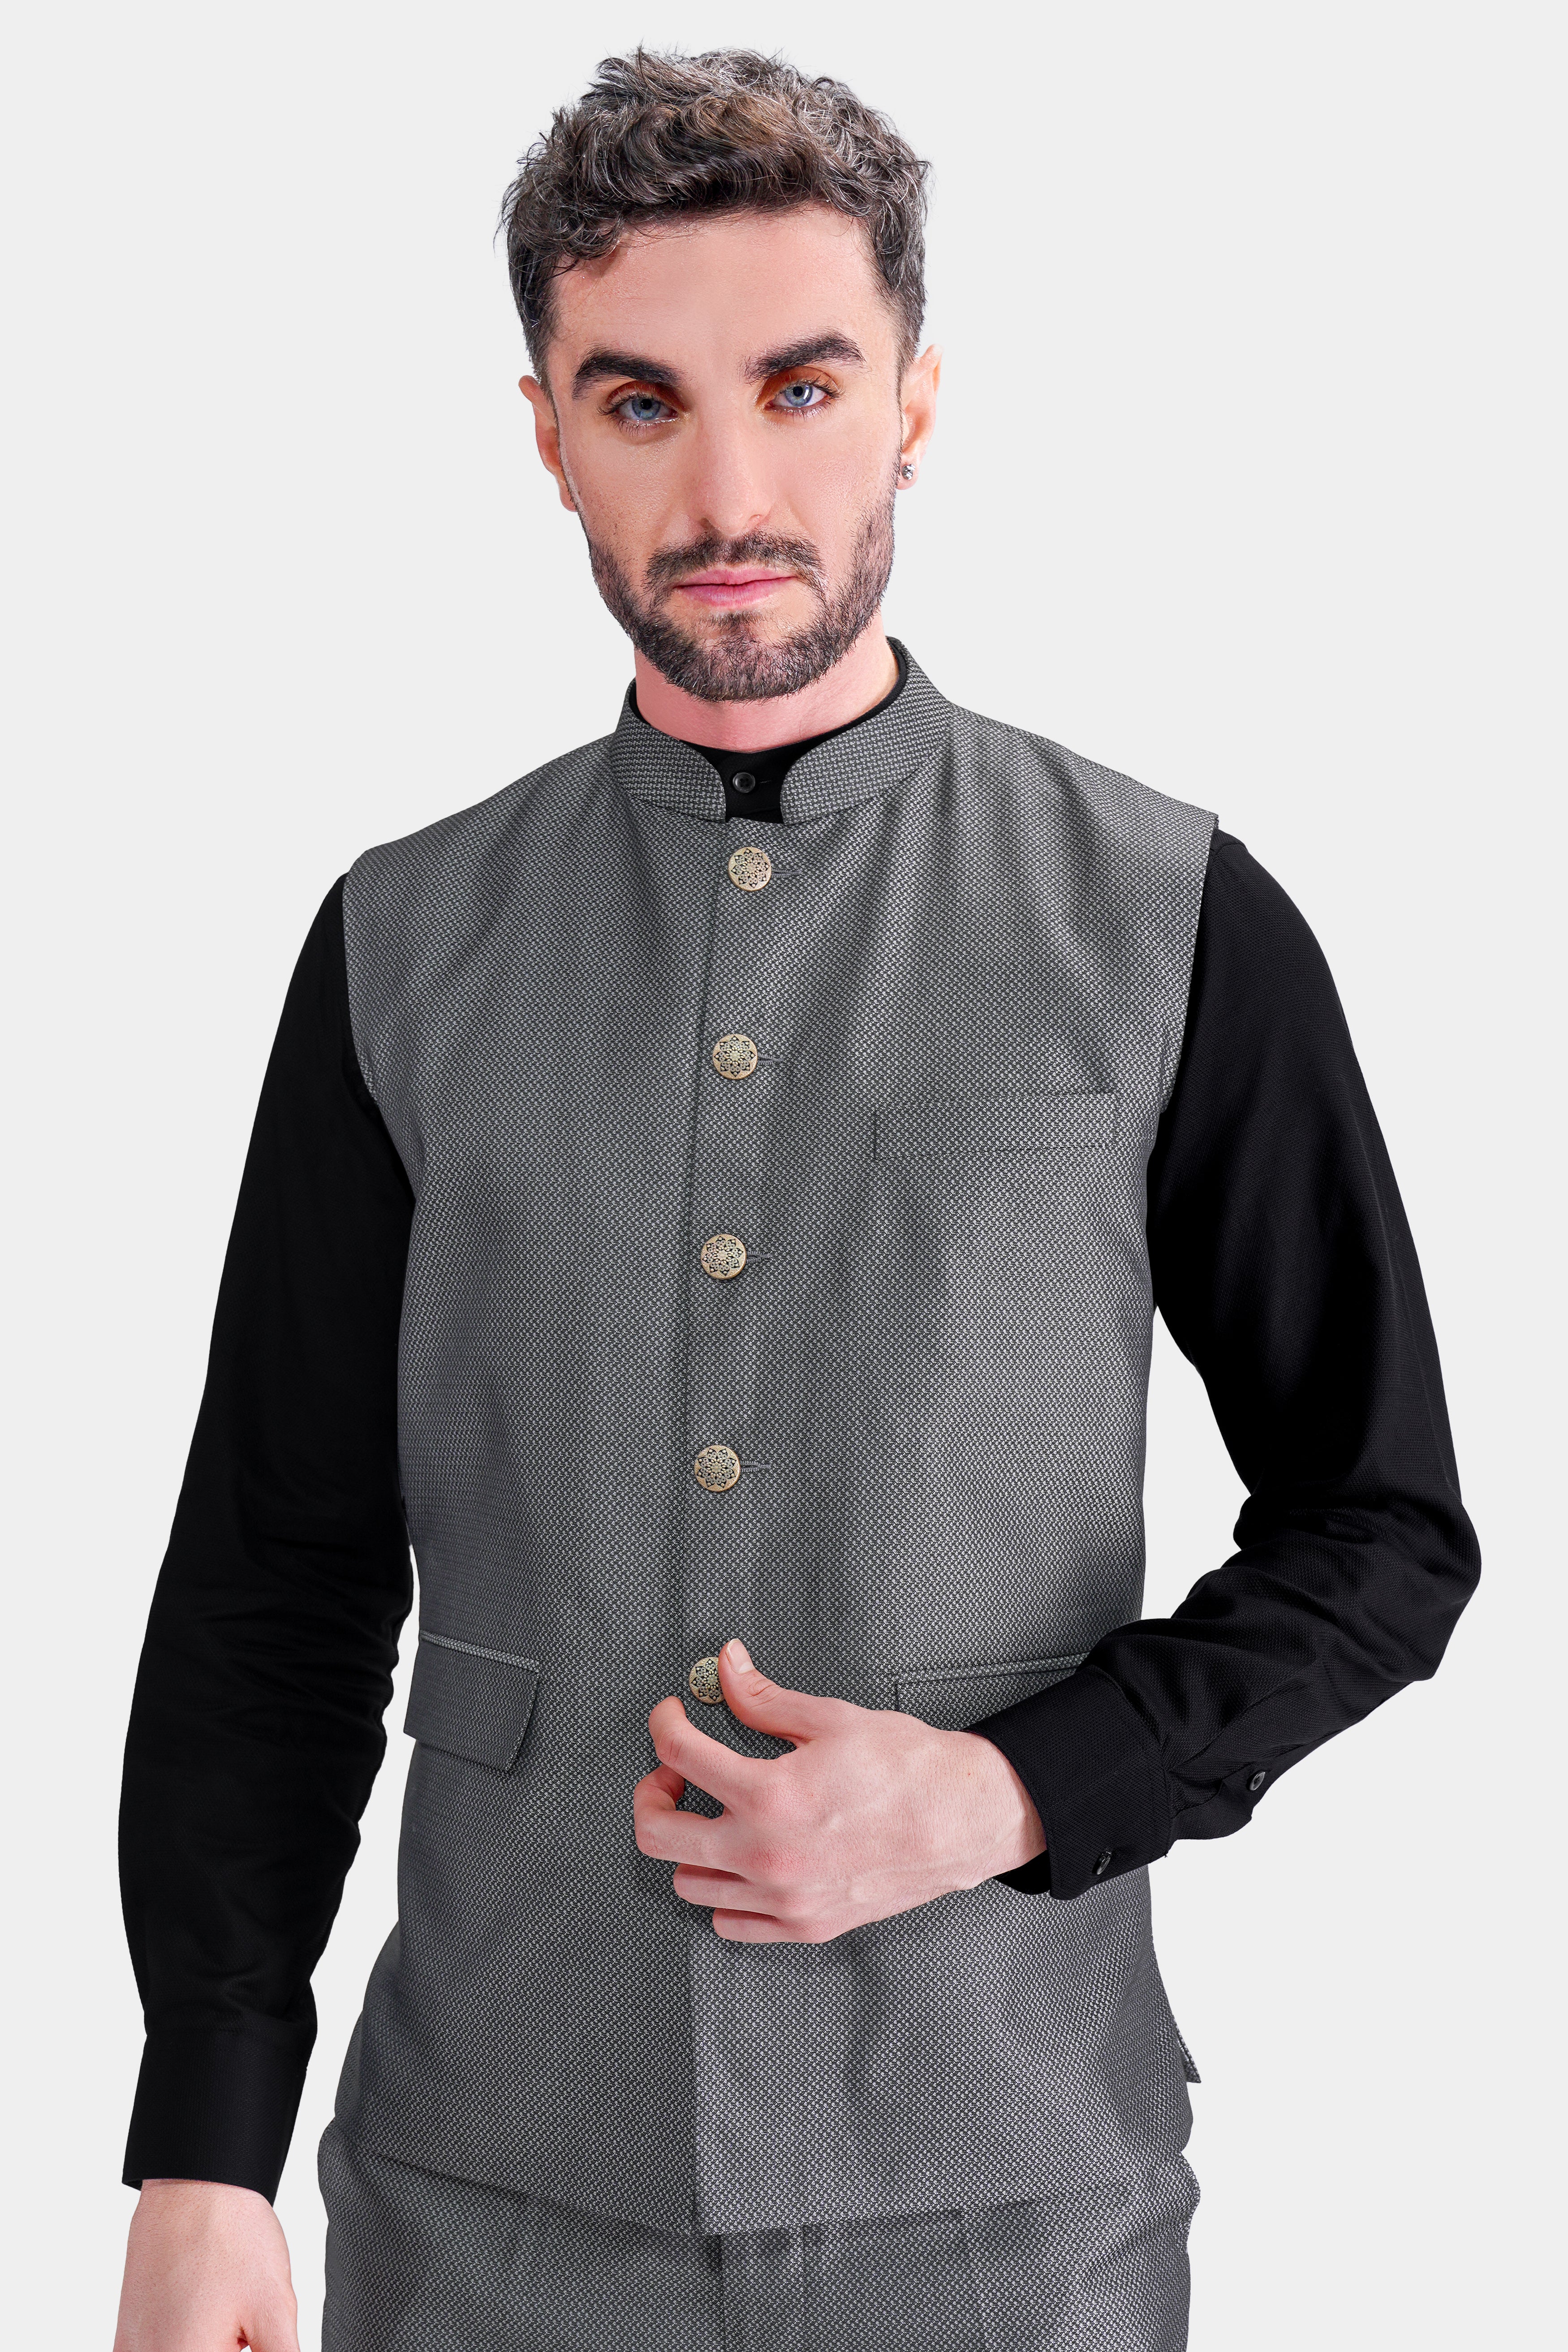 Bespoke Traditional Indian Kurta Pajama Nehru Modi Jacket Set in Sea Green  Color Perfect for Weddings, Available in Father Son Combo - Etsy